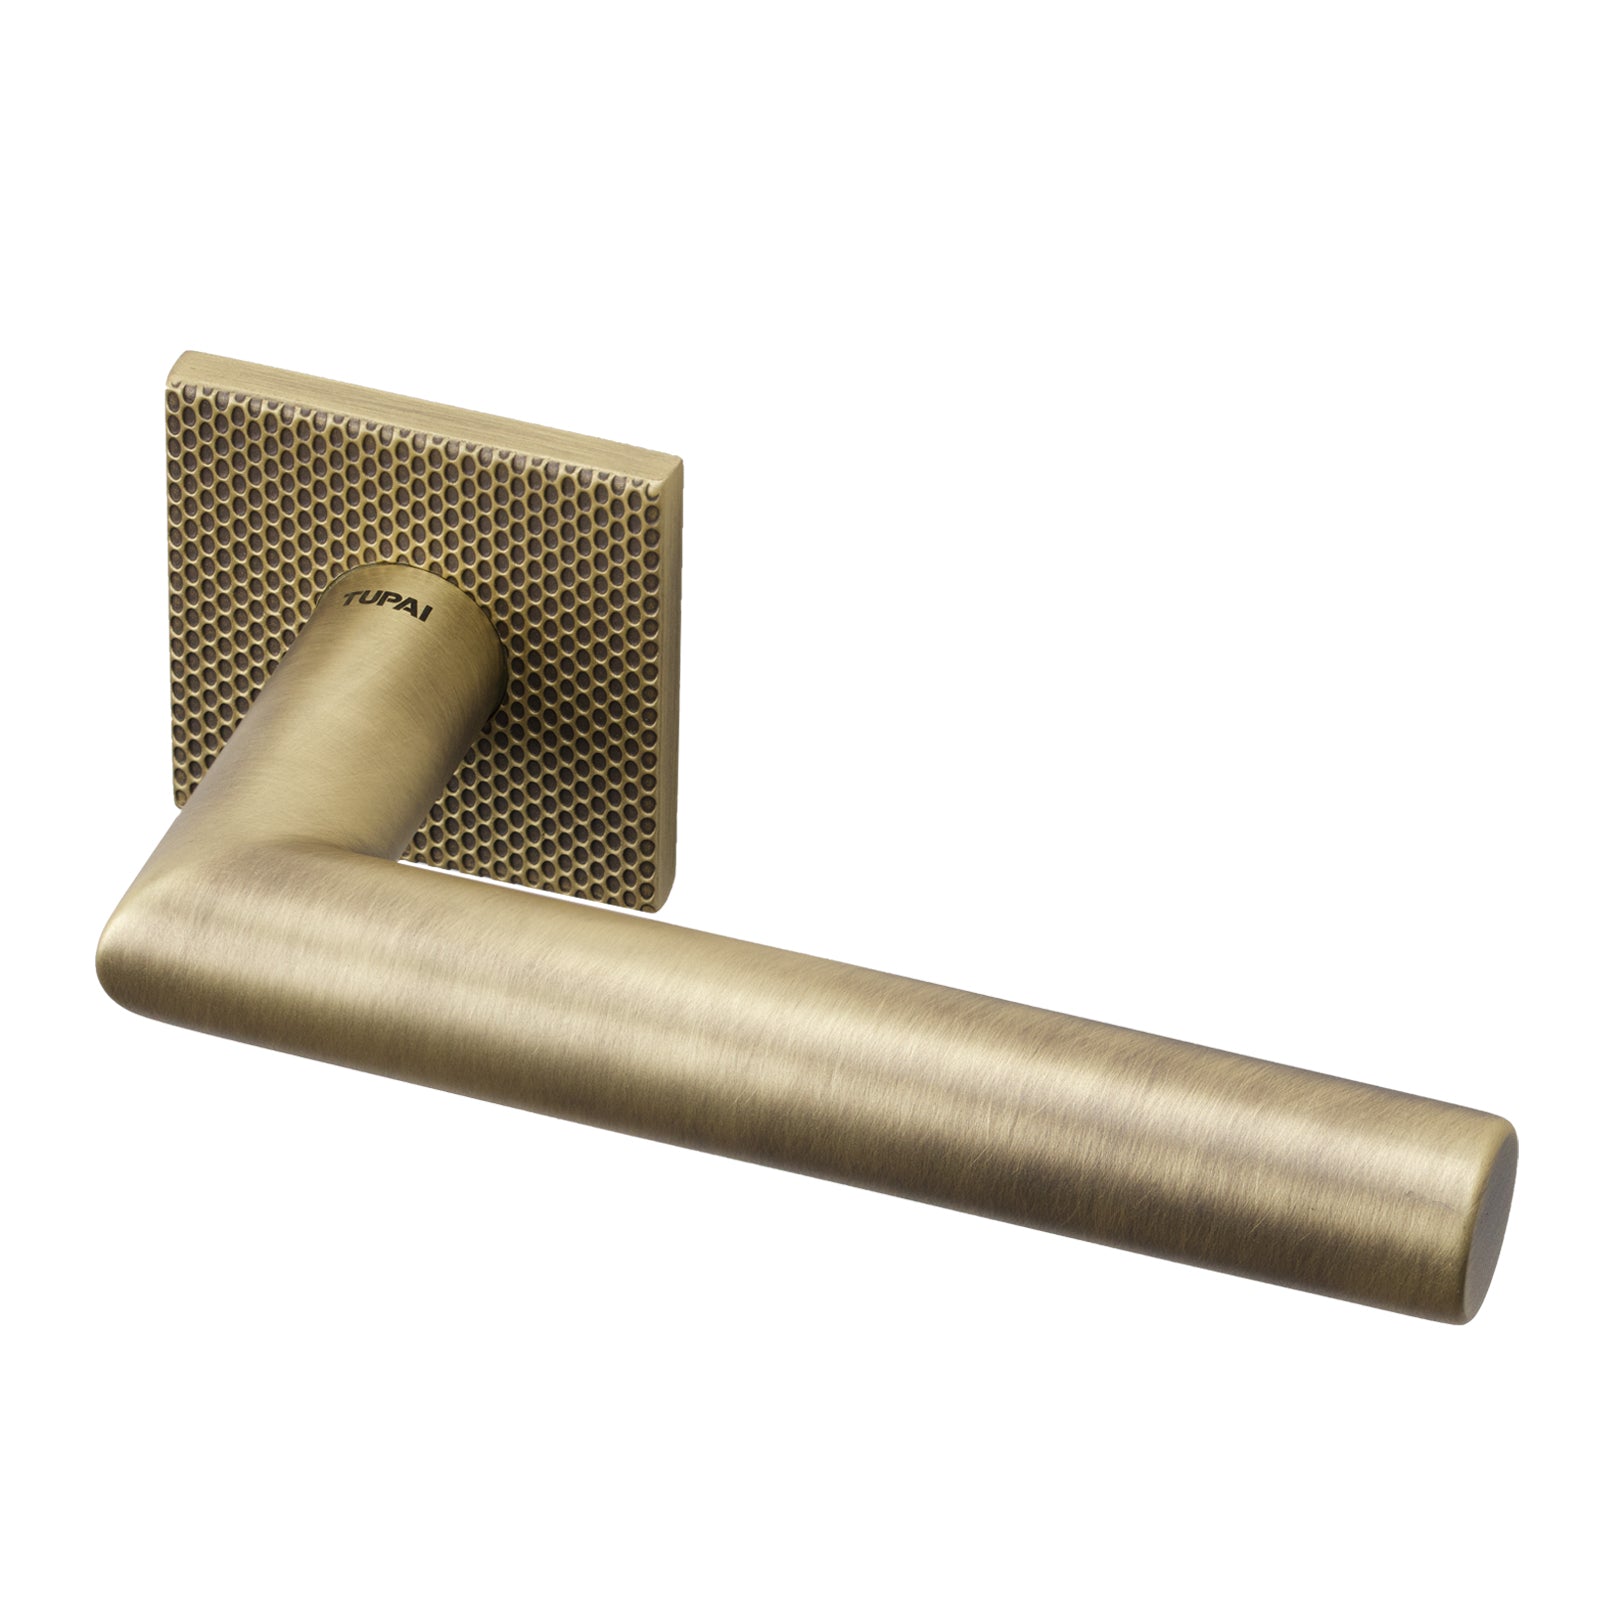 Larouco Waterfall Texture Lever on Rose Door Handle in Antique Brass Finish SHOW